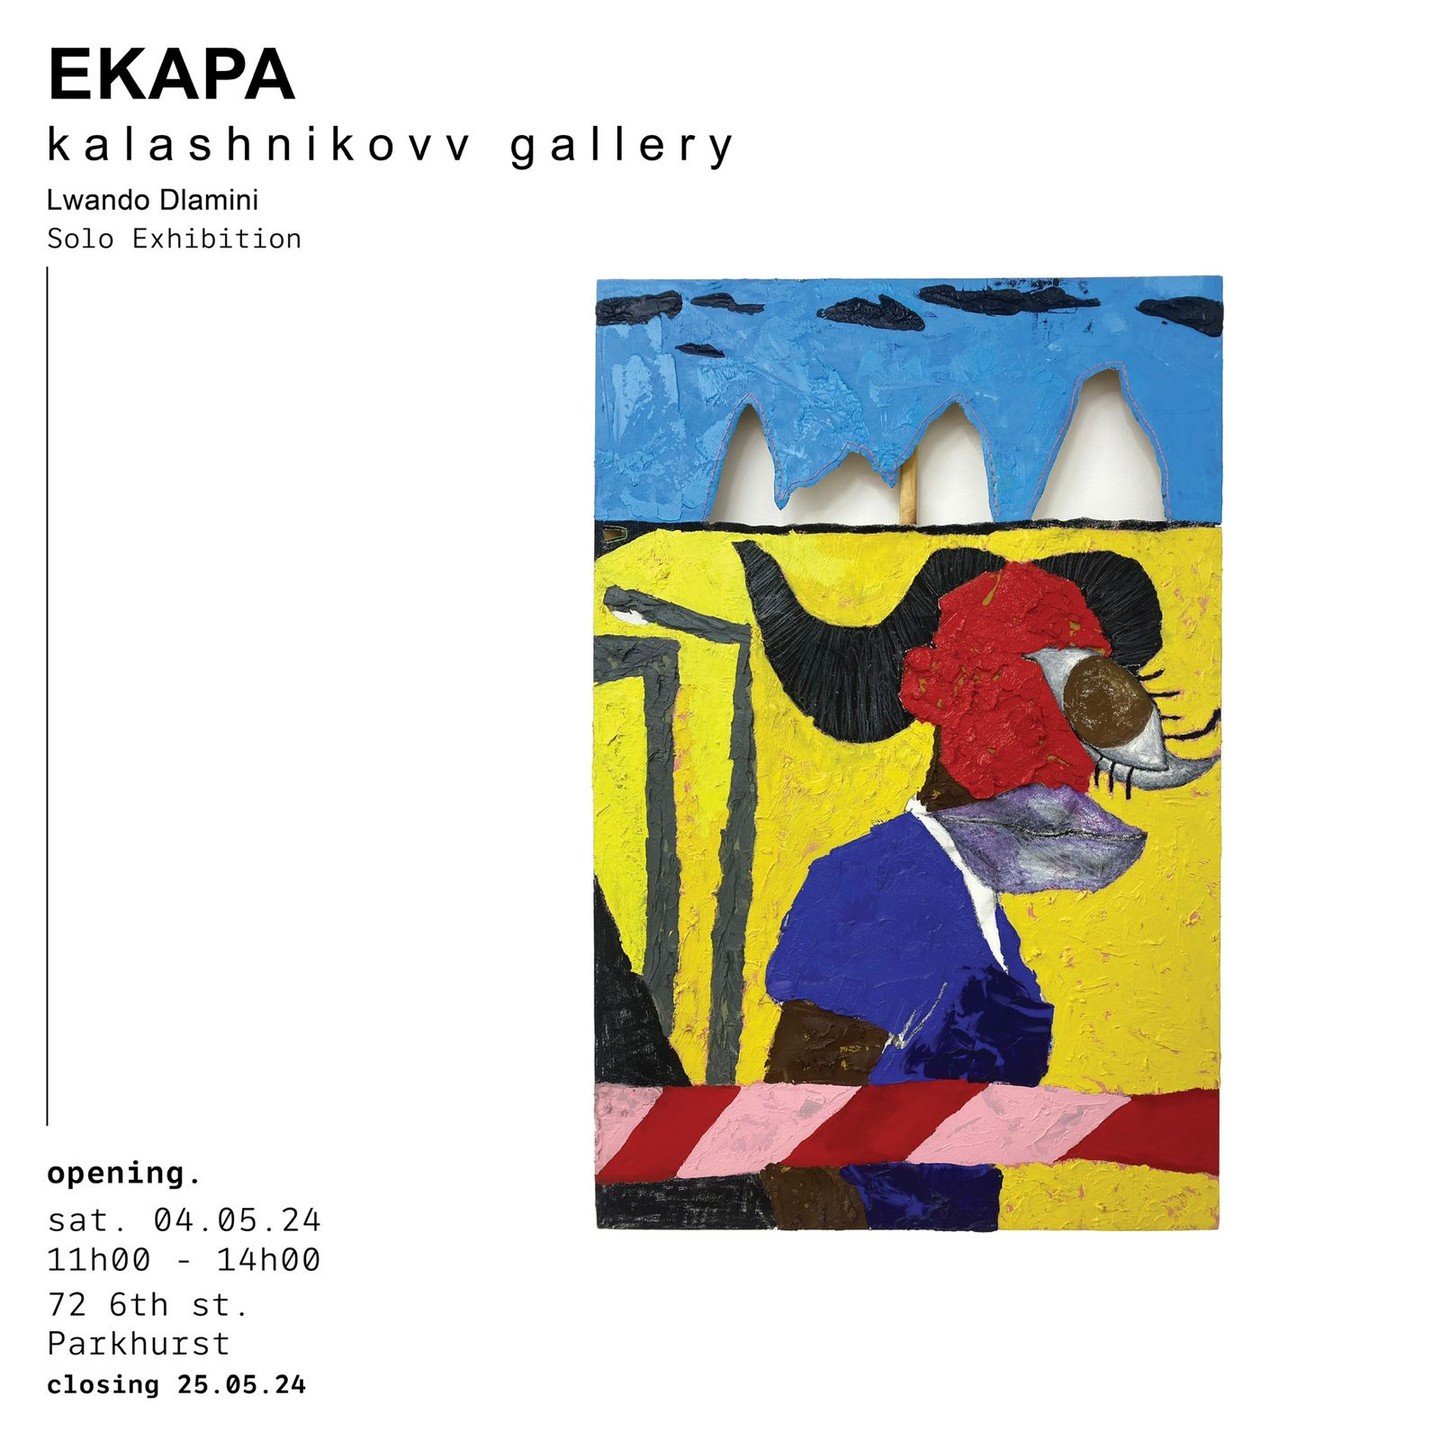 Opening this Saturday is Lwando Dlamini's solo exhibition, &quot;Ekapa&quot;, at Kalashnikovv Gallery.

Join us this Saturday, from 11:00 to 14:00, at 72 6th Street, Parkhurst.

Saturday's opening will also feature a curated DJ lineup by @fag.winter,